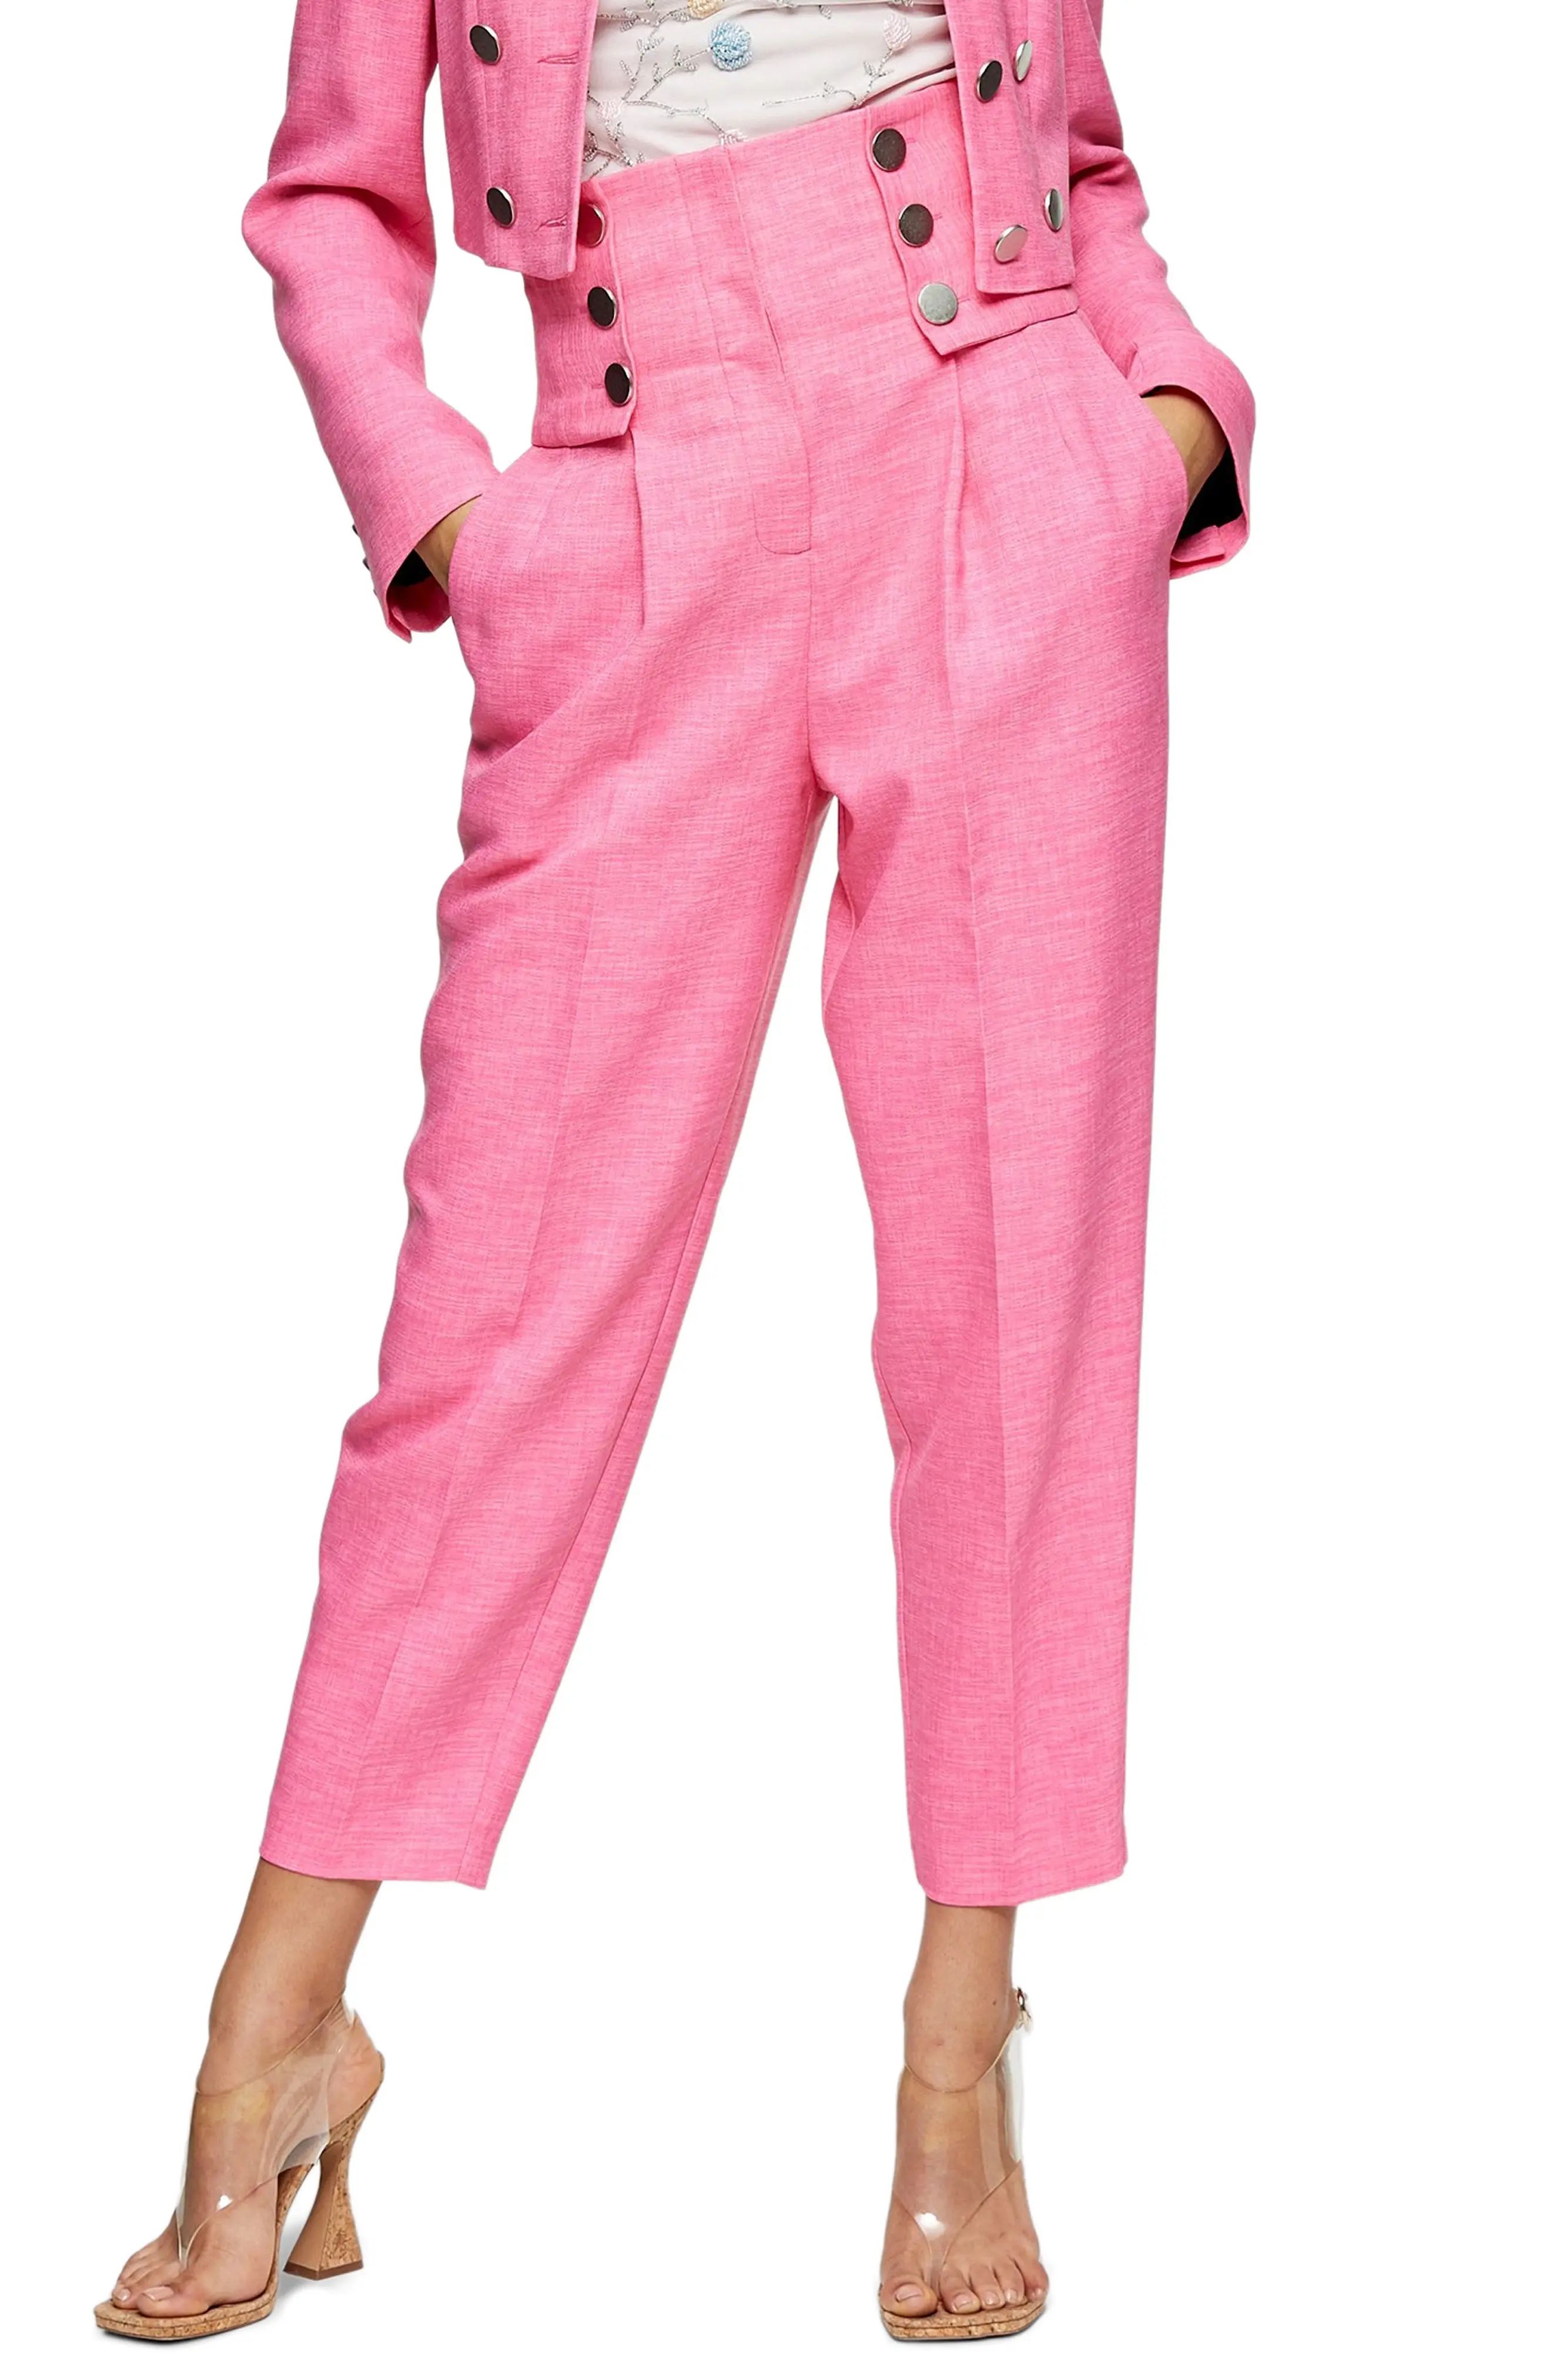 Women's Topshop High Waist Tapered Trousers, Size 2 US (fits like 0) - Pink | Nordstrom